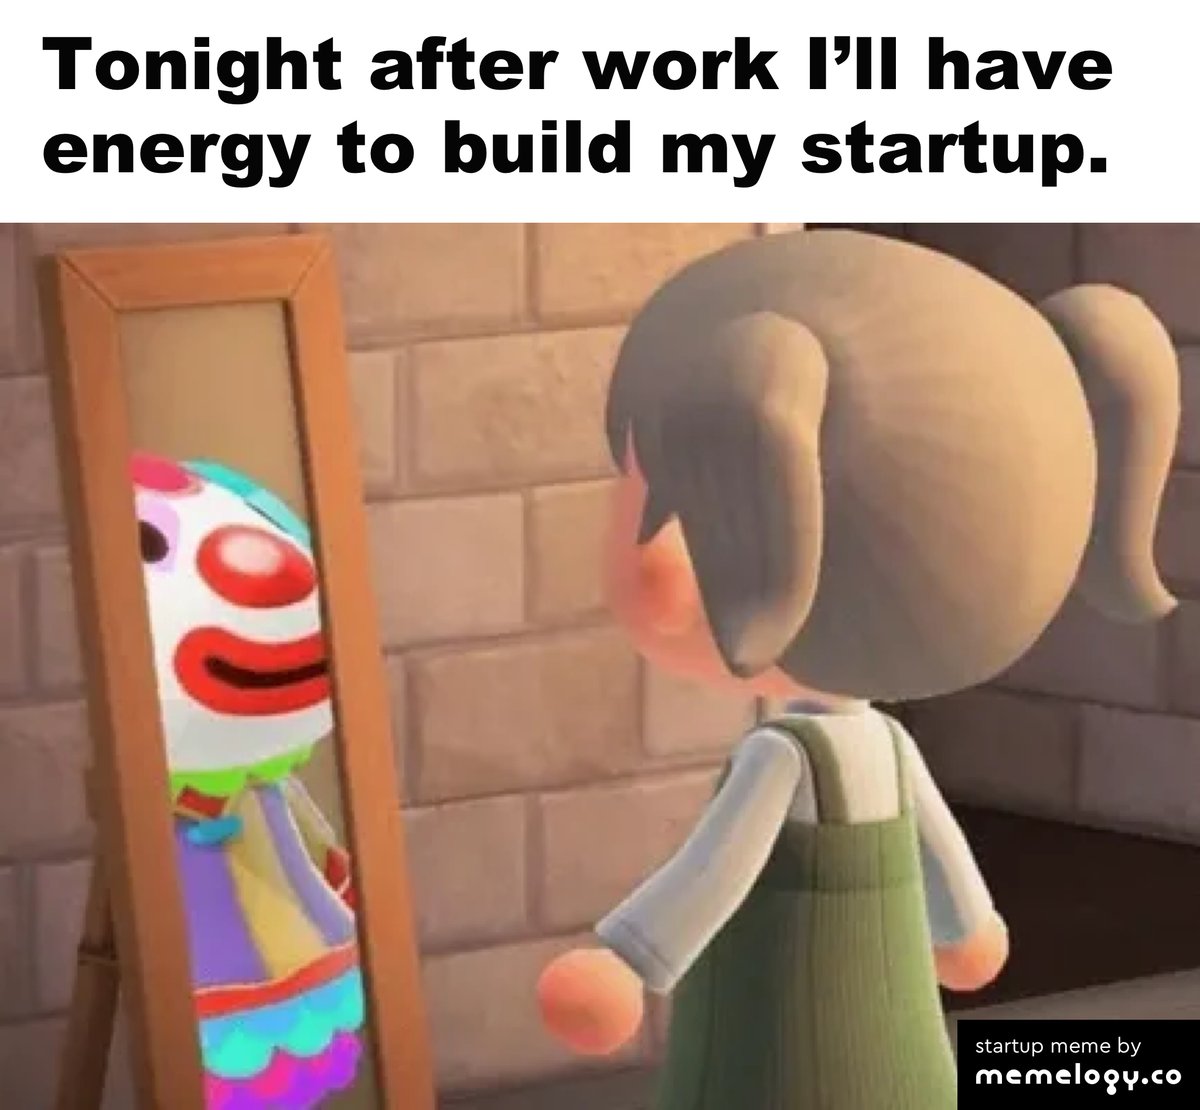 Good luck to every startup founder who still has a job 🥲